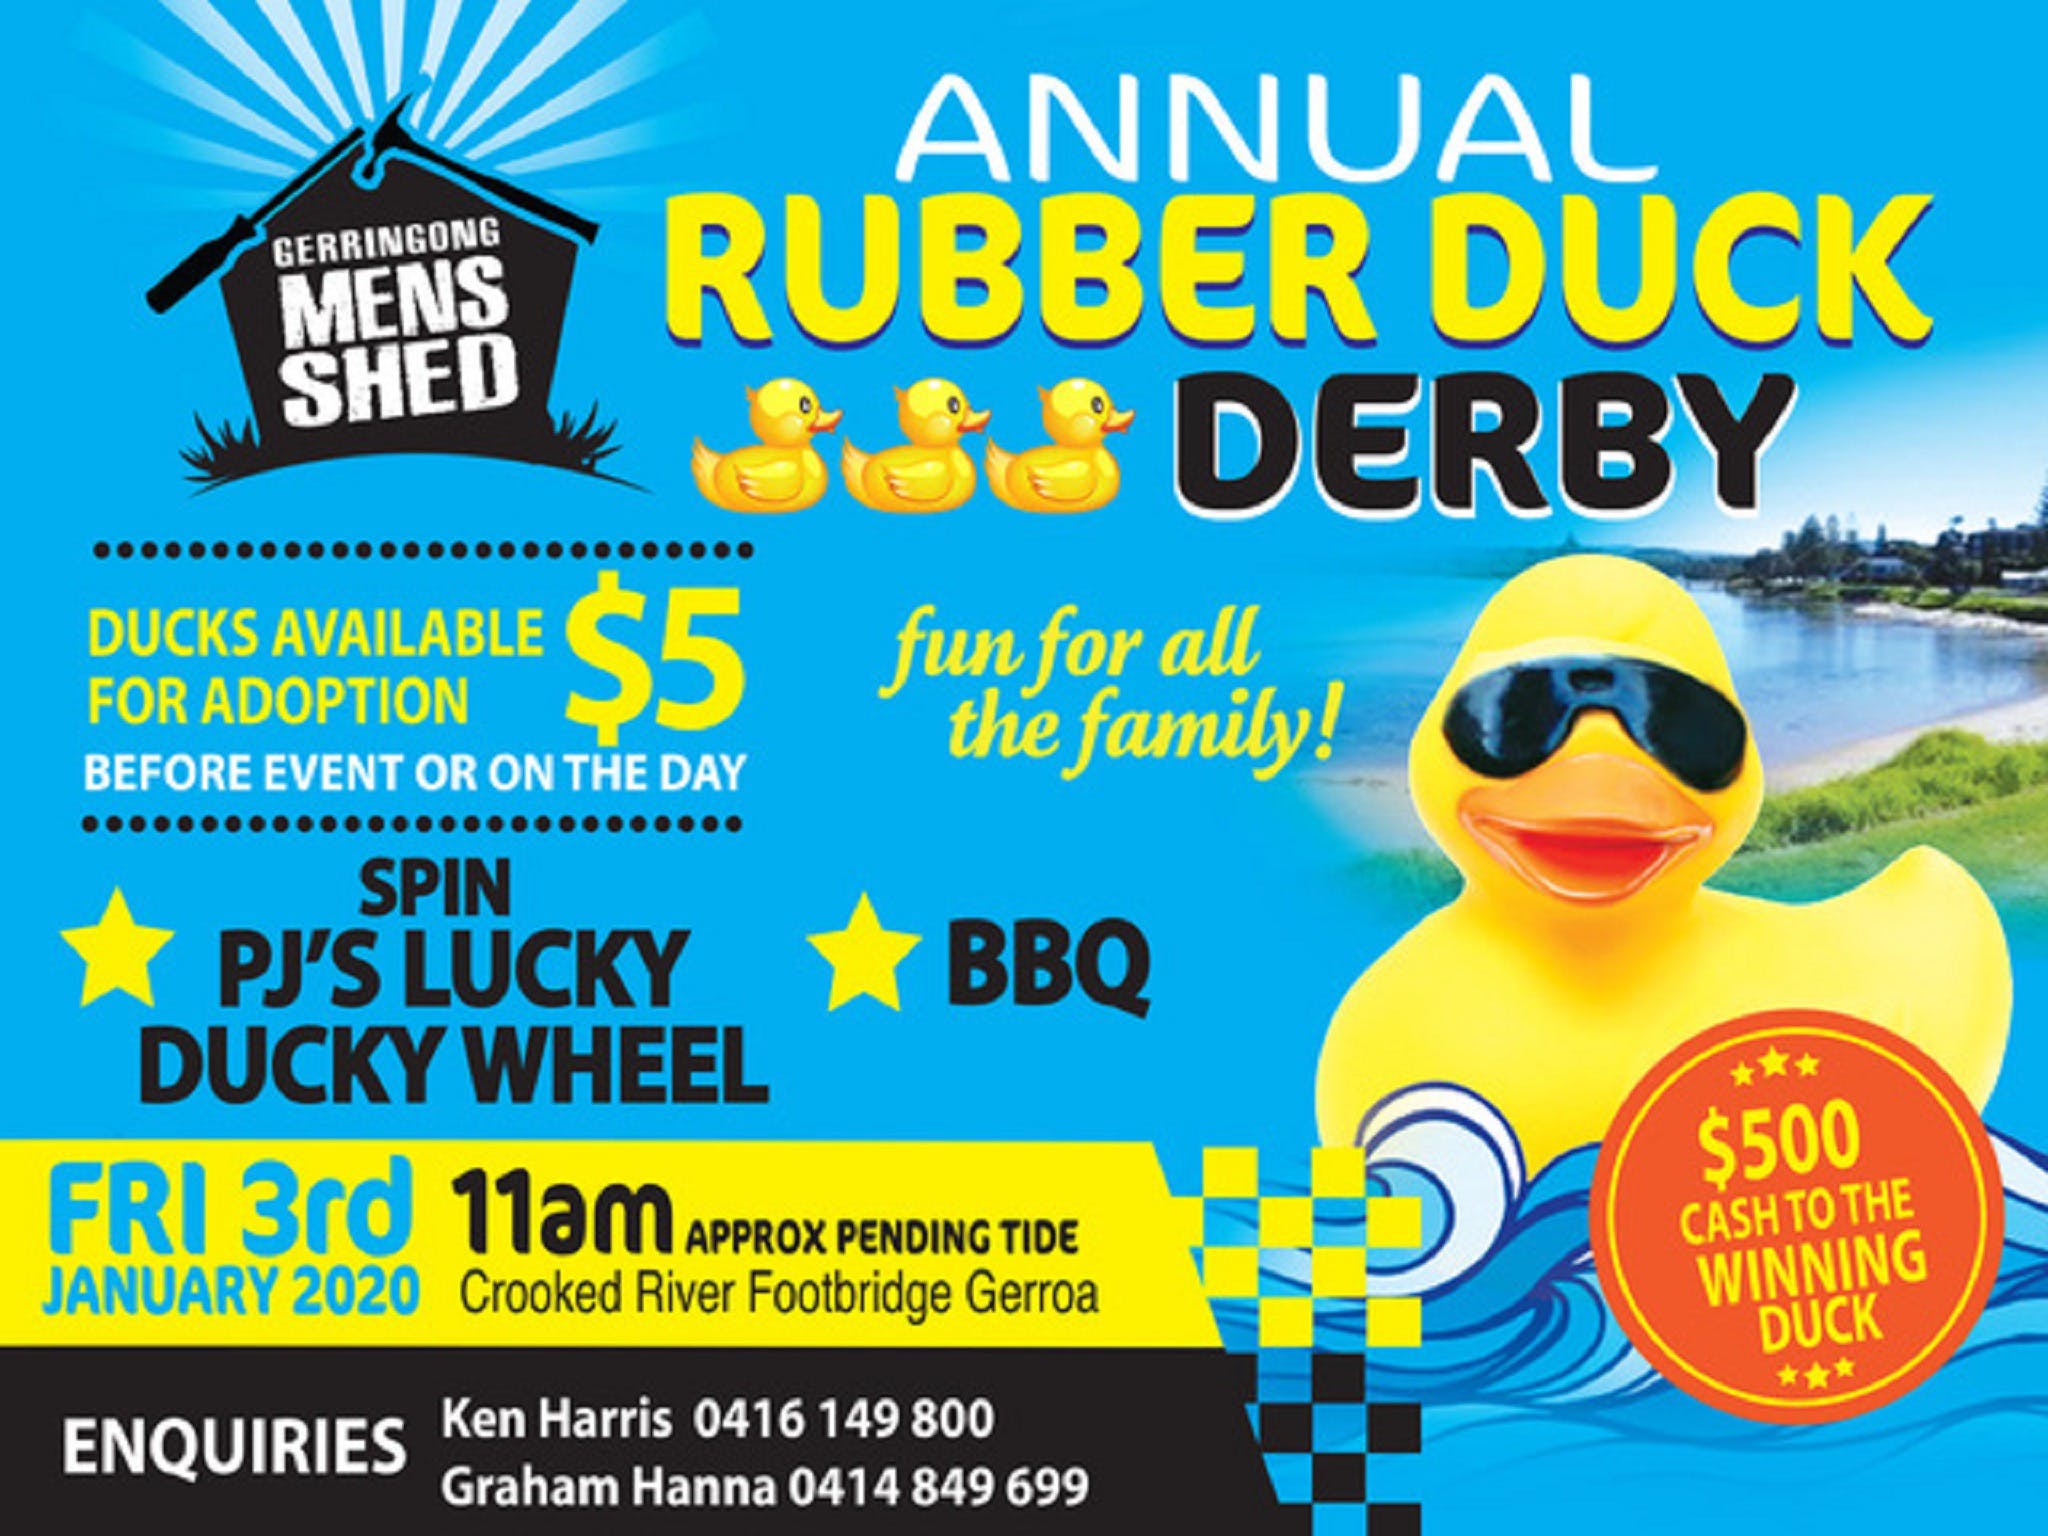 Gerringong Mens Shed Annual Duck Derby - Tweed Heads Accommodation